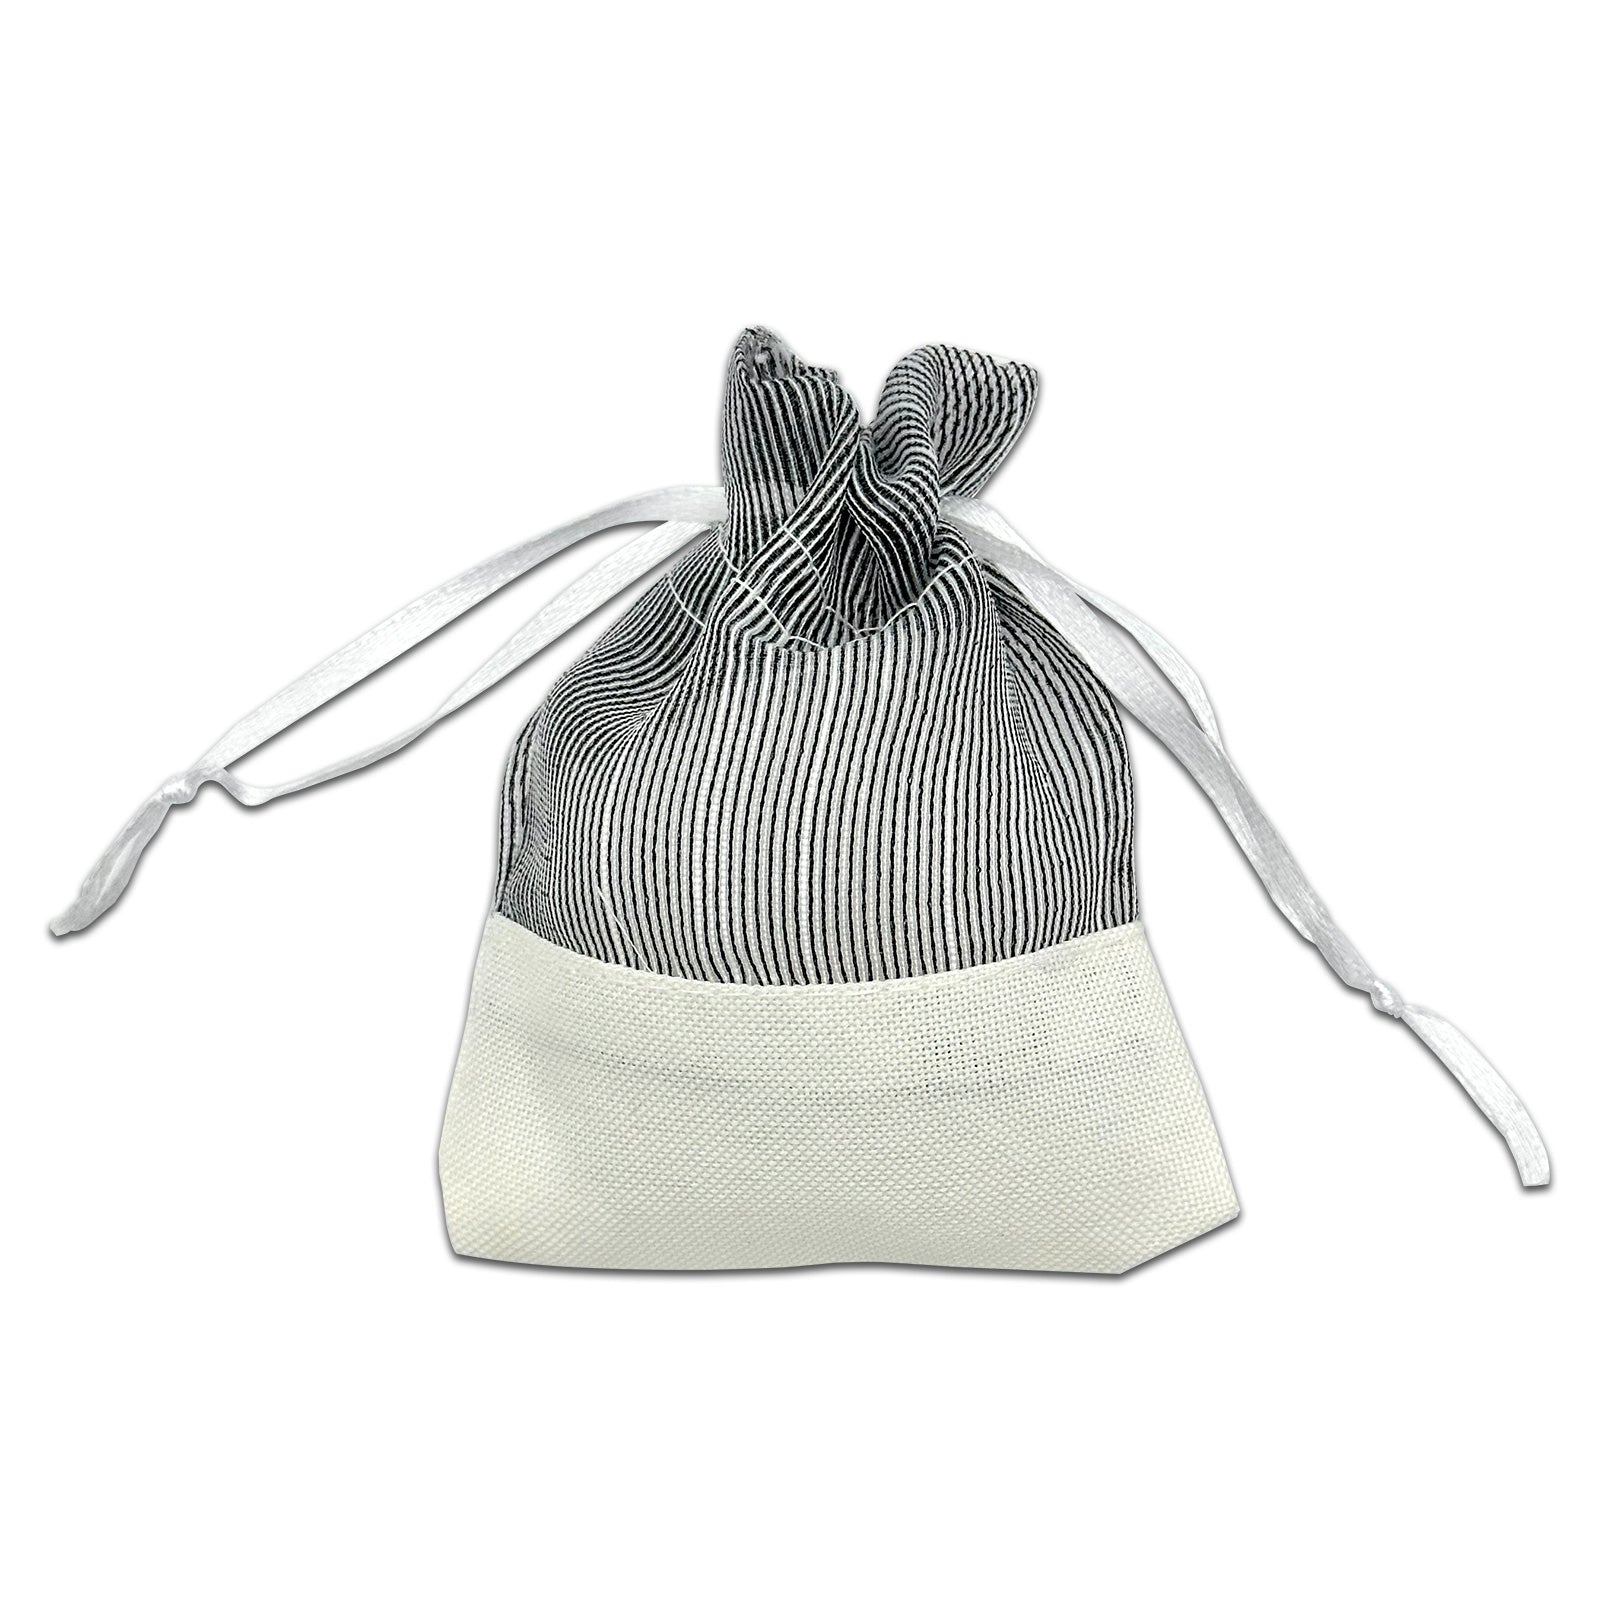 Drawstring Pouch, Small Gift Bags,Drawstring Bags, Cotton